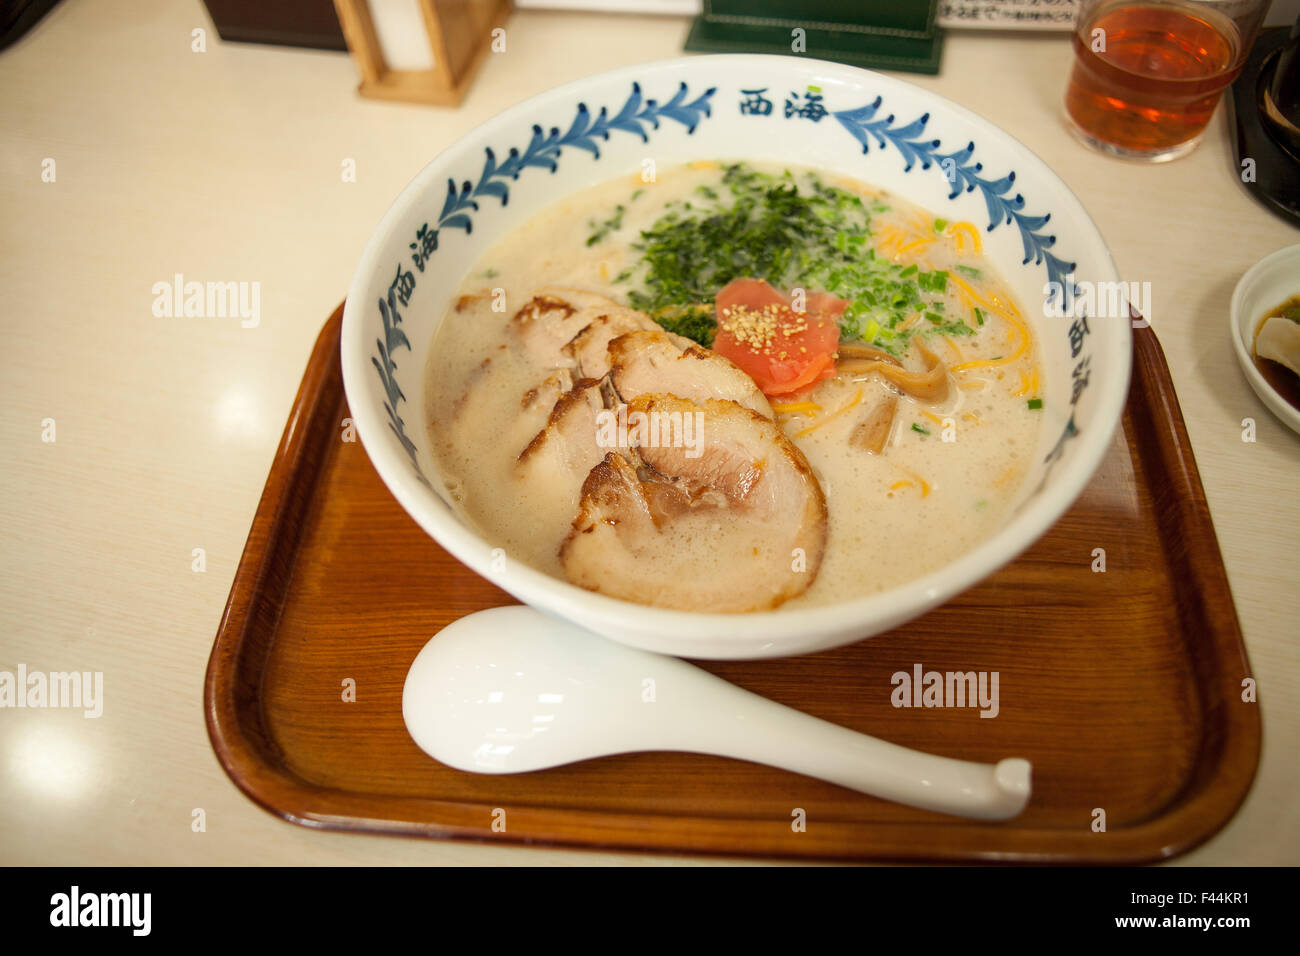 Chashu Pork - The Forked Spoon